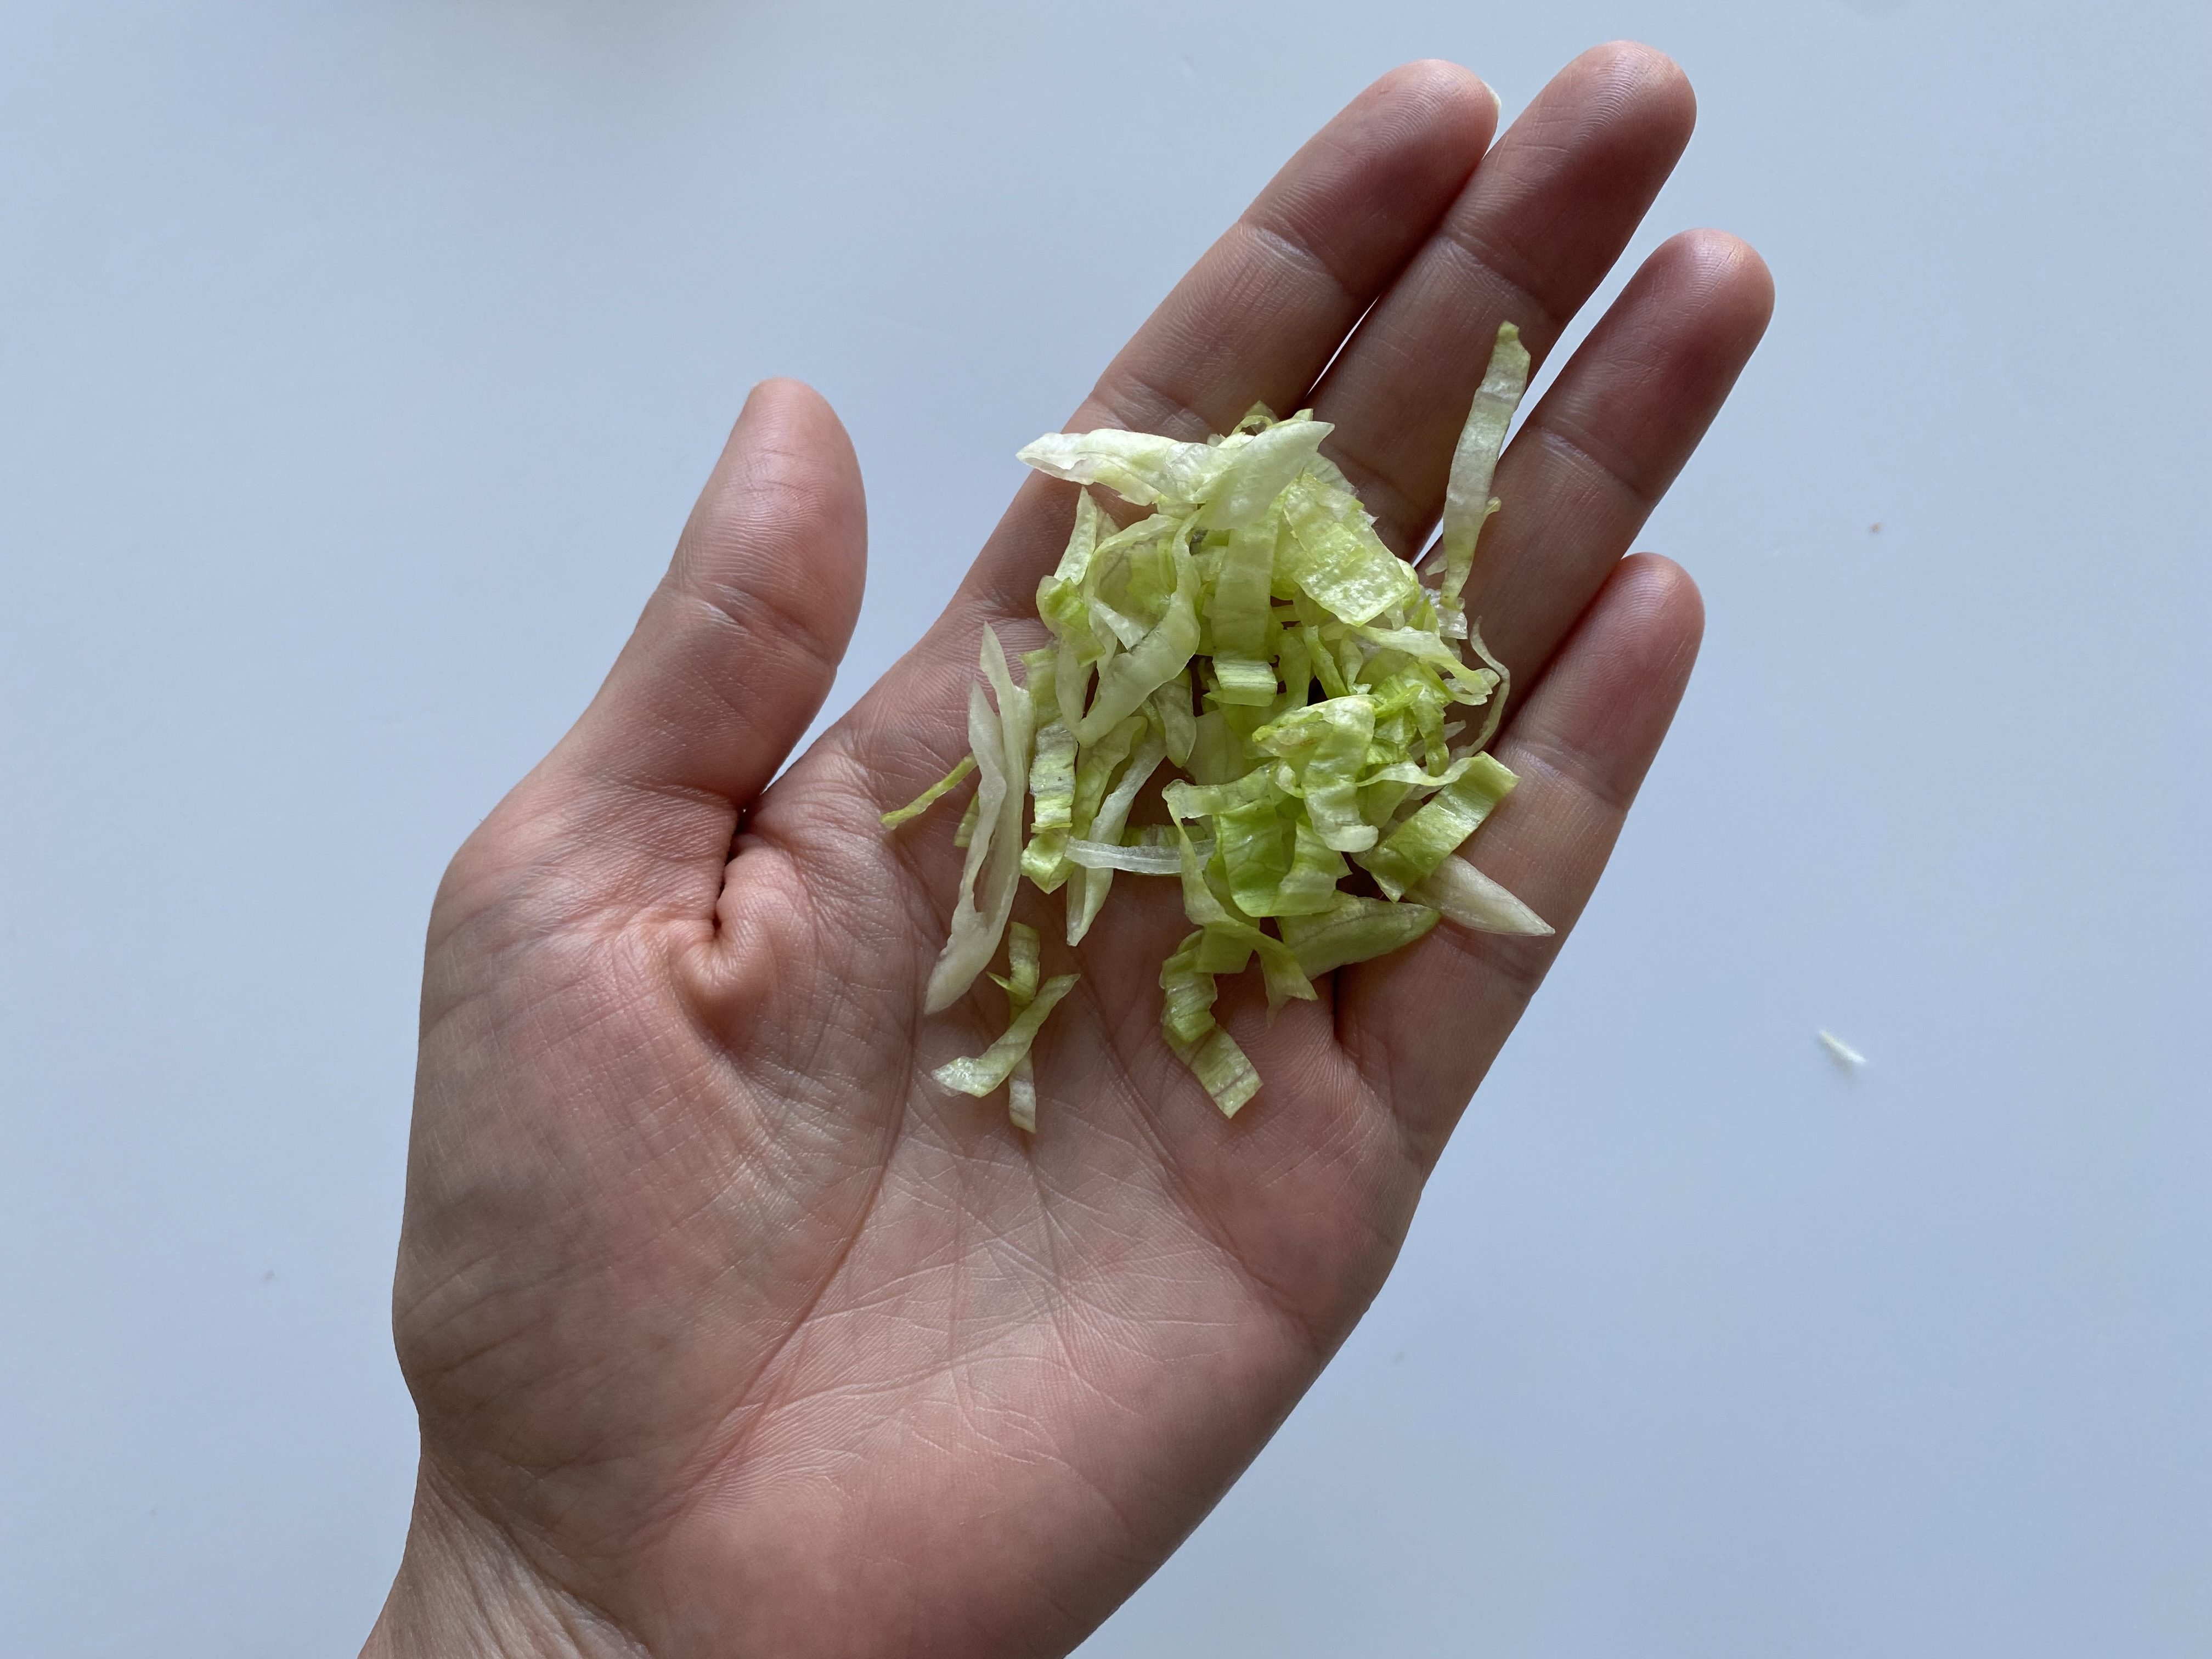 a hand holding a small amount of shredded iceberg lettuce